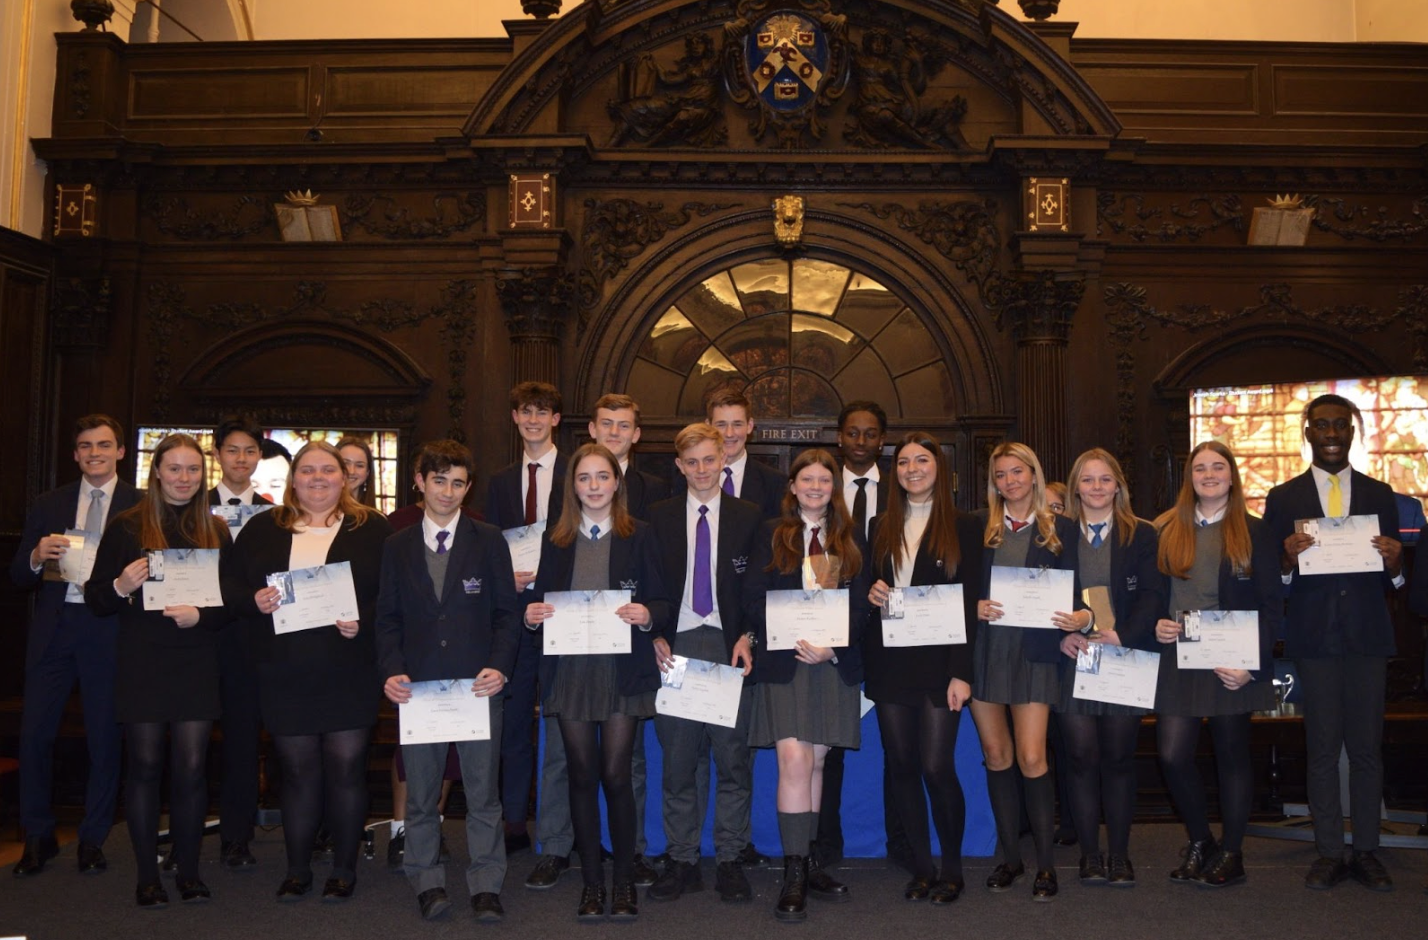 Students holding certificates of prize giving at Stationers' Hall, London